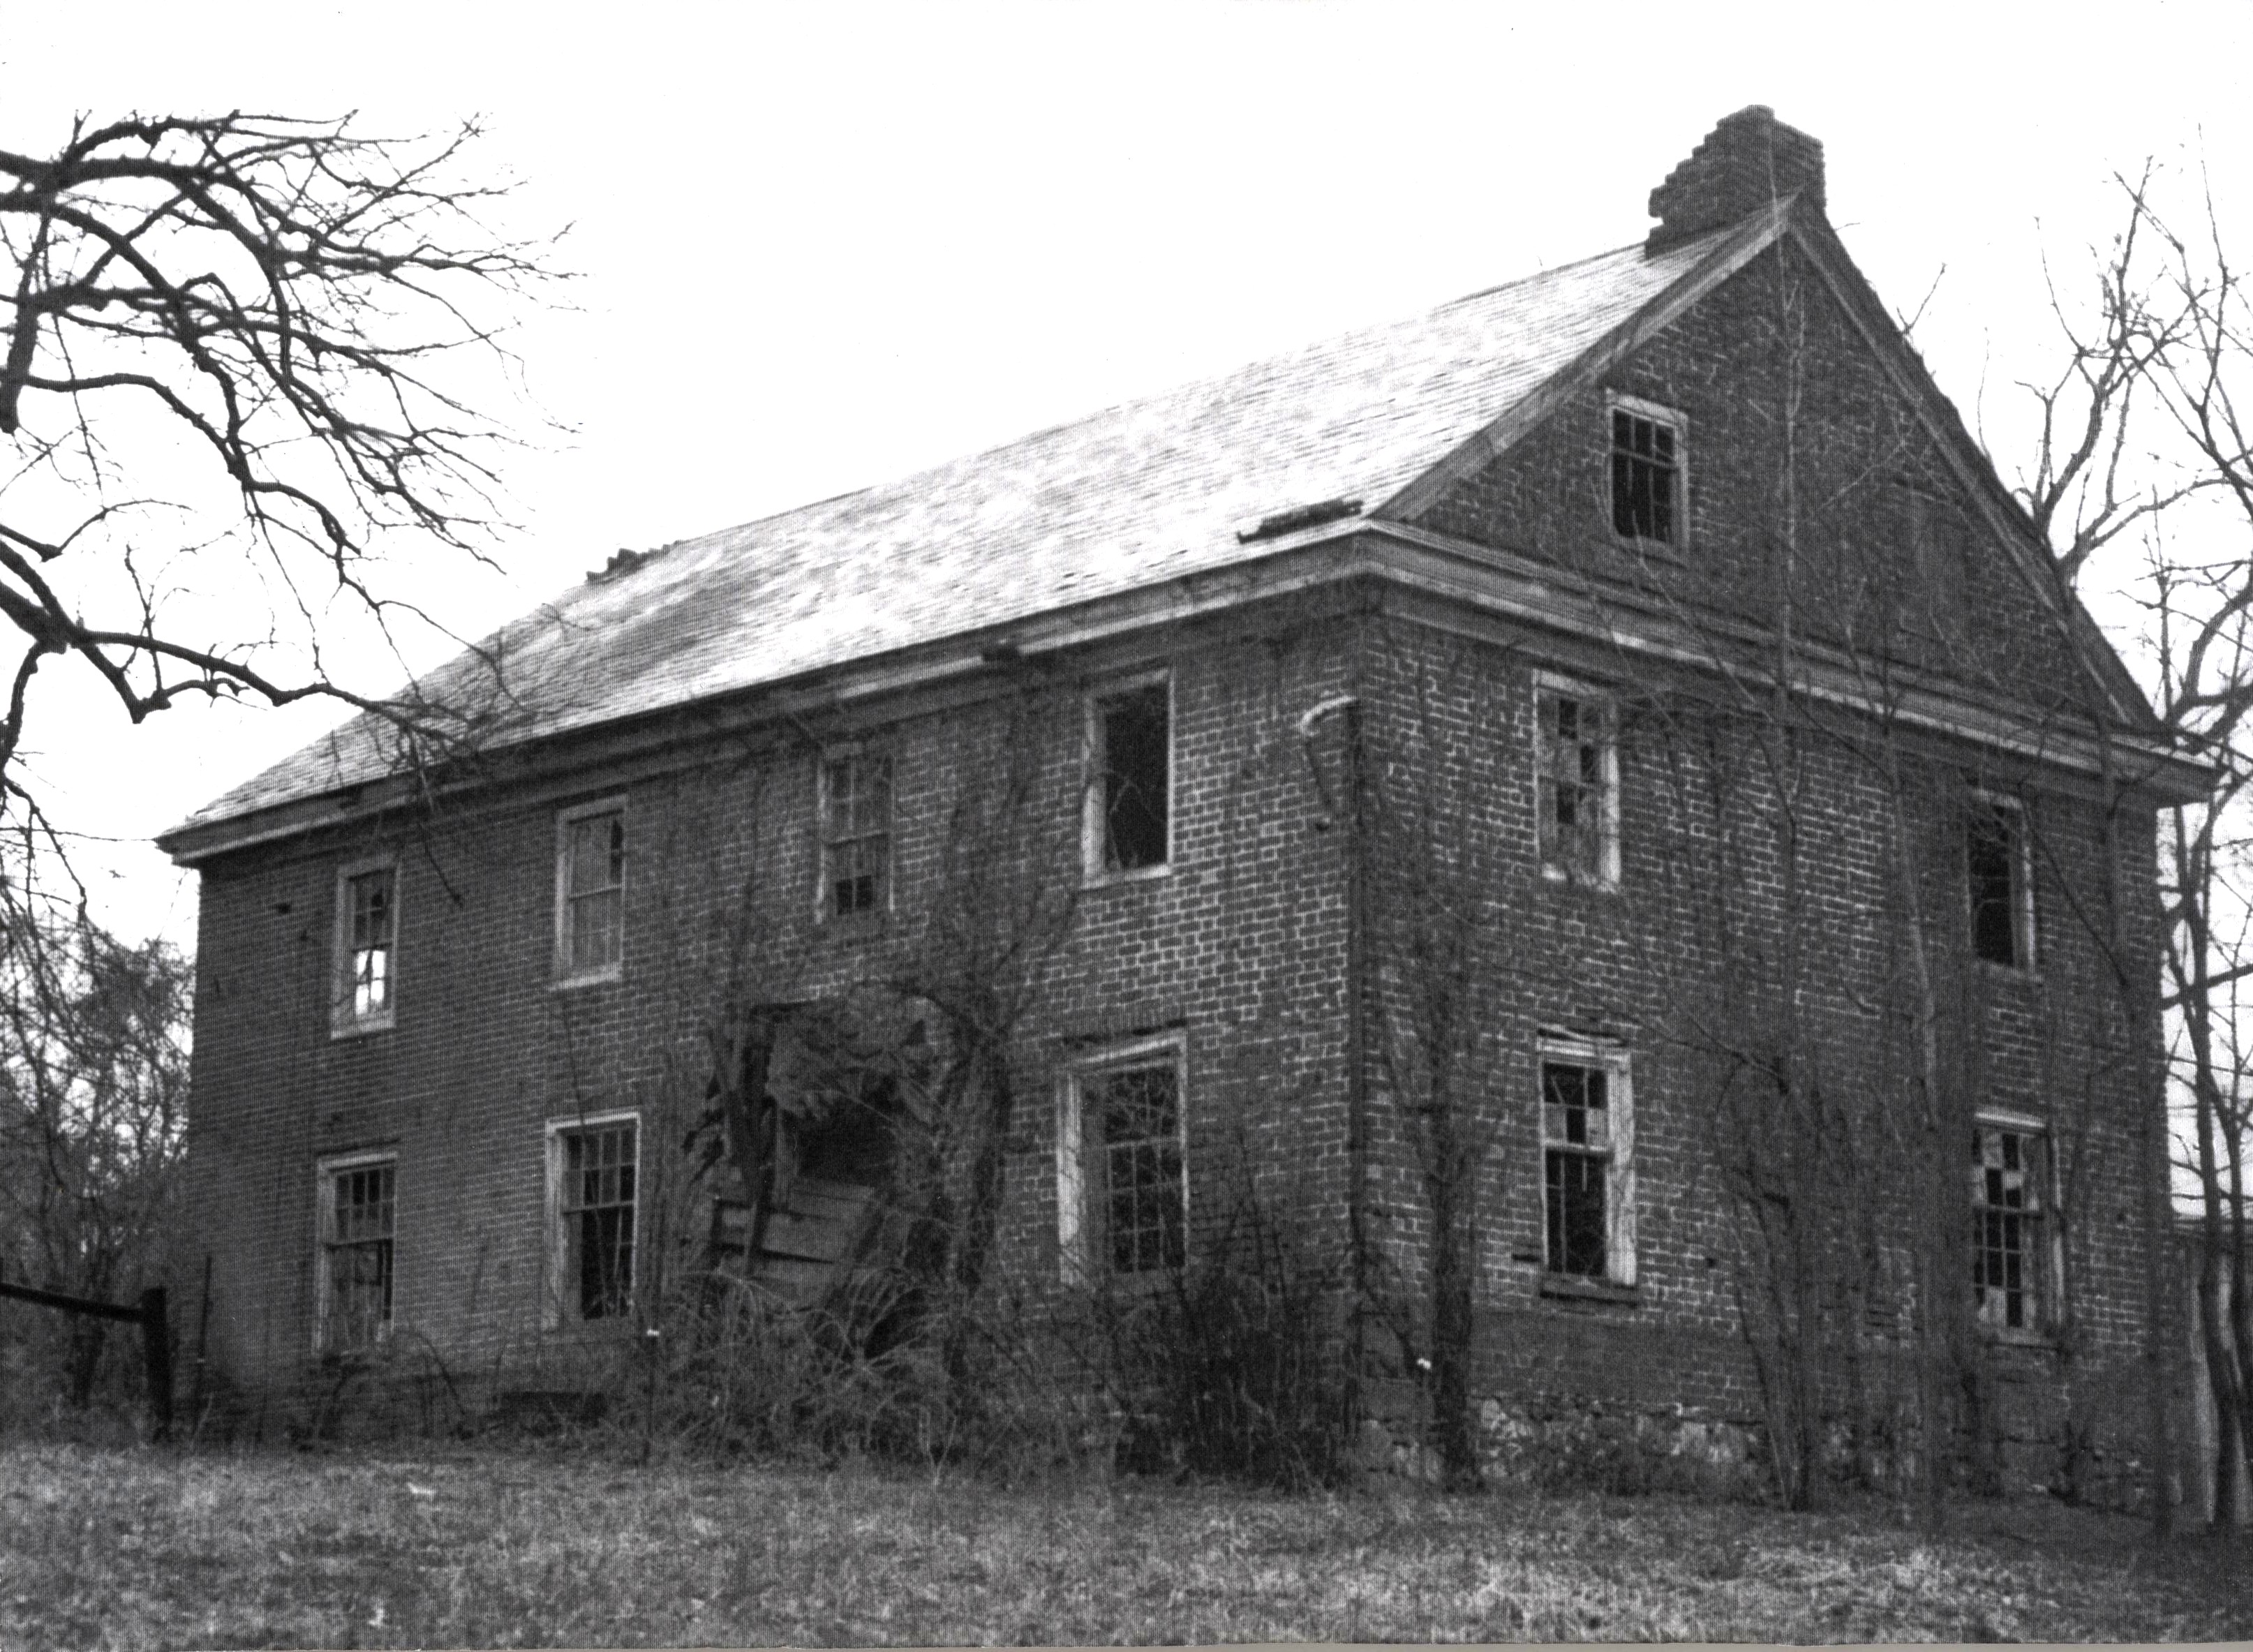 An old home with broken windows, a collapsed entryway, and visible damage to the roof, walls and chimney.